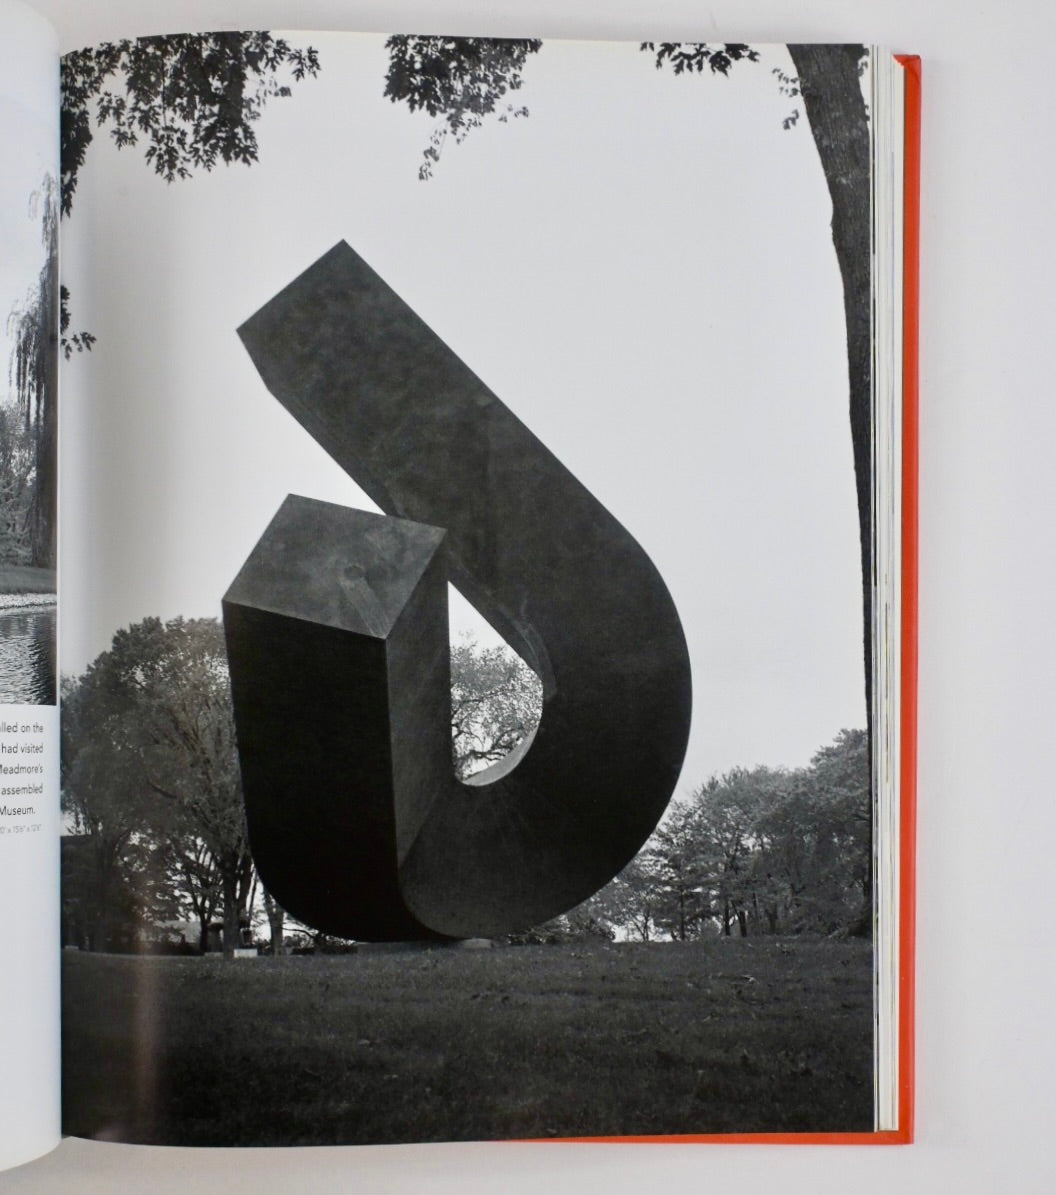 LIPPINCOT, Jonathan D. Large Scale: Fabricating Sculpture in the 1960s and 1970s.